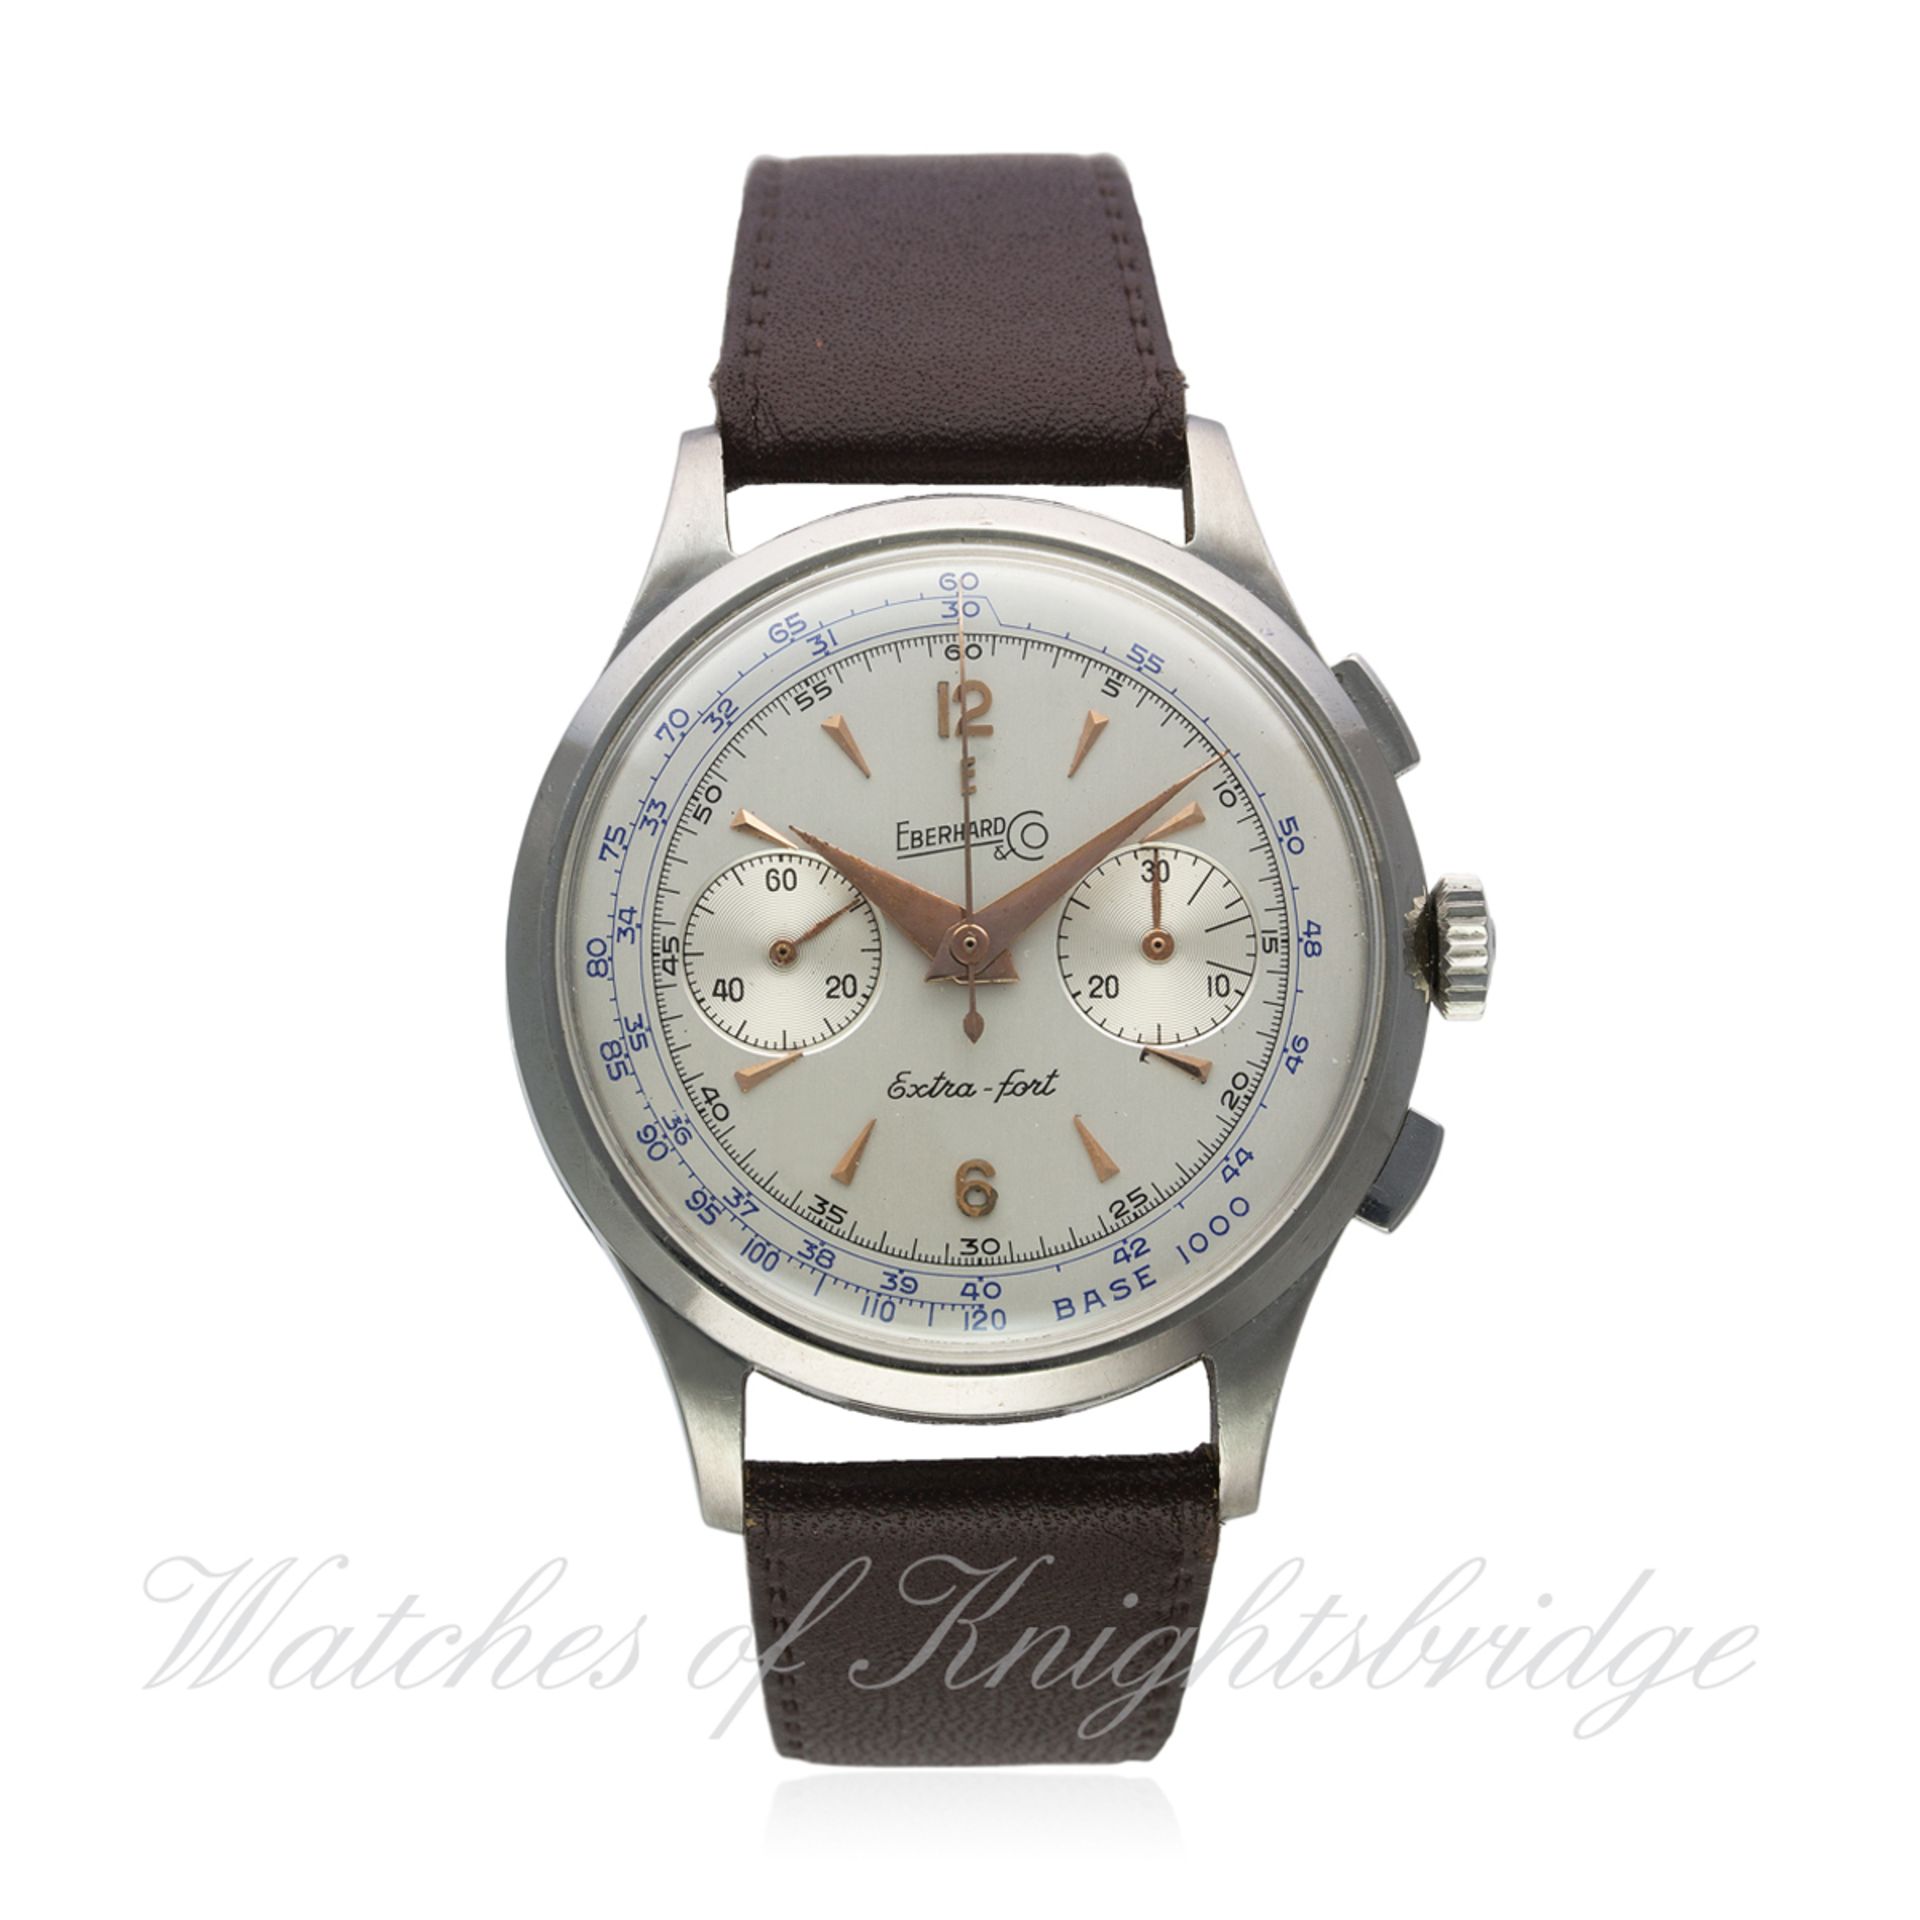 A RARE GENTLEMAN'S STAINLESS STEEL EBERHARD & CO EXTRA FORT CHRONOGRAPH WRIST WATCH CIRCA 1950s,